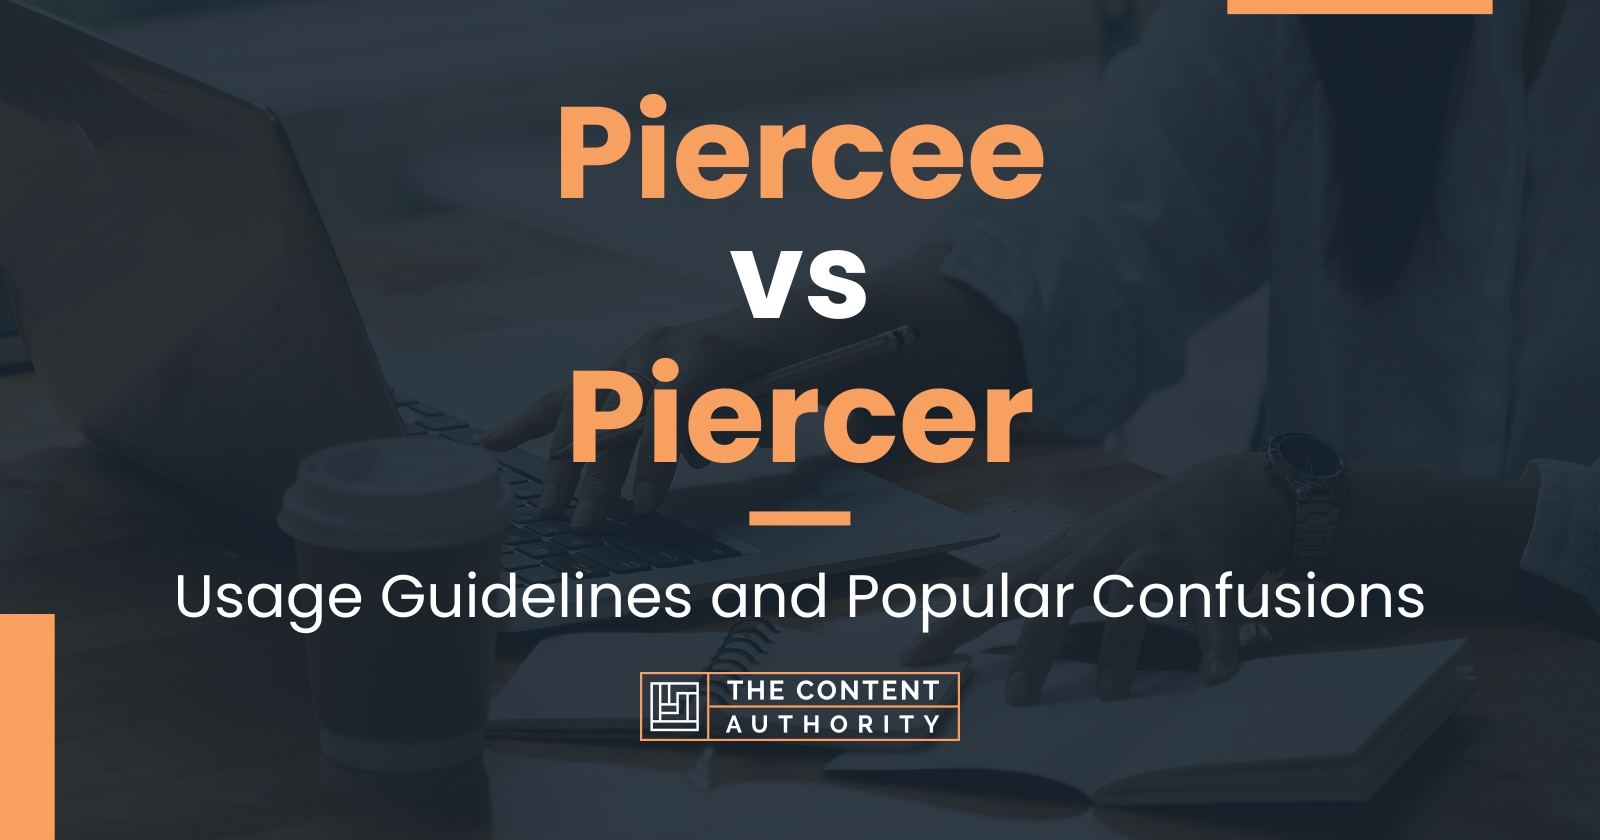 Piercee vs Piercer: Usage Guidelines and Popular Confusions